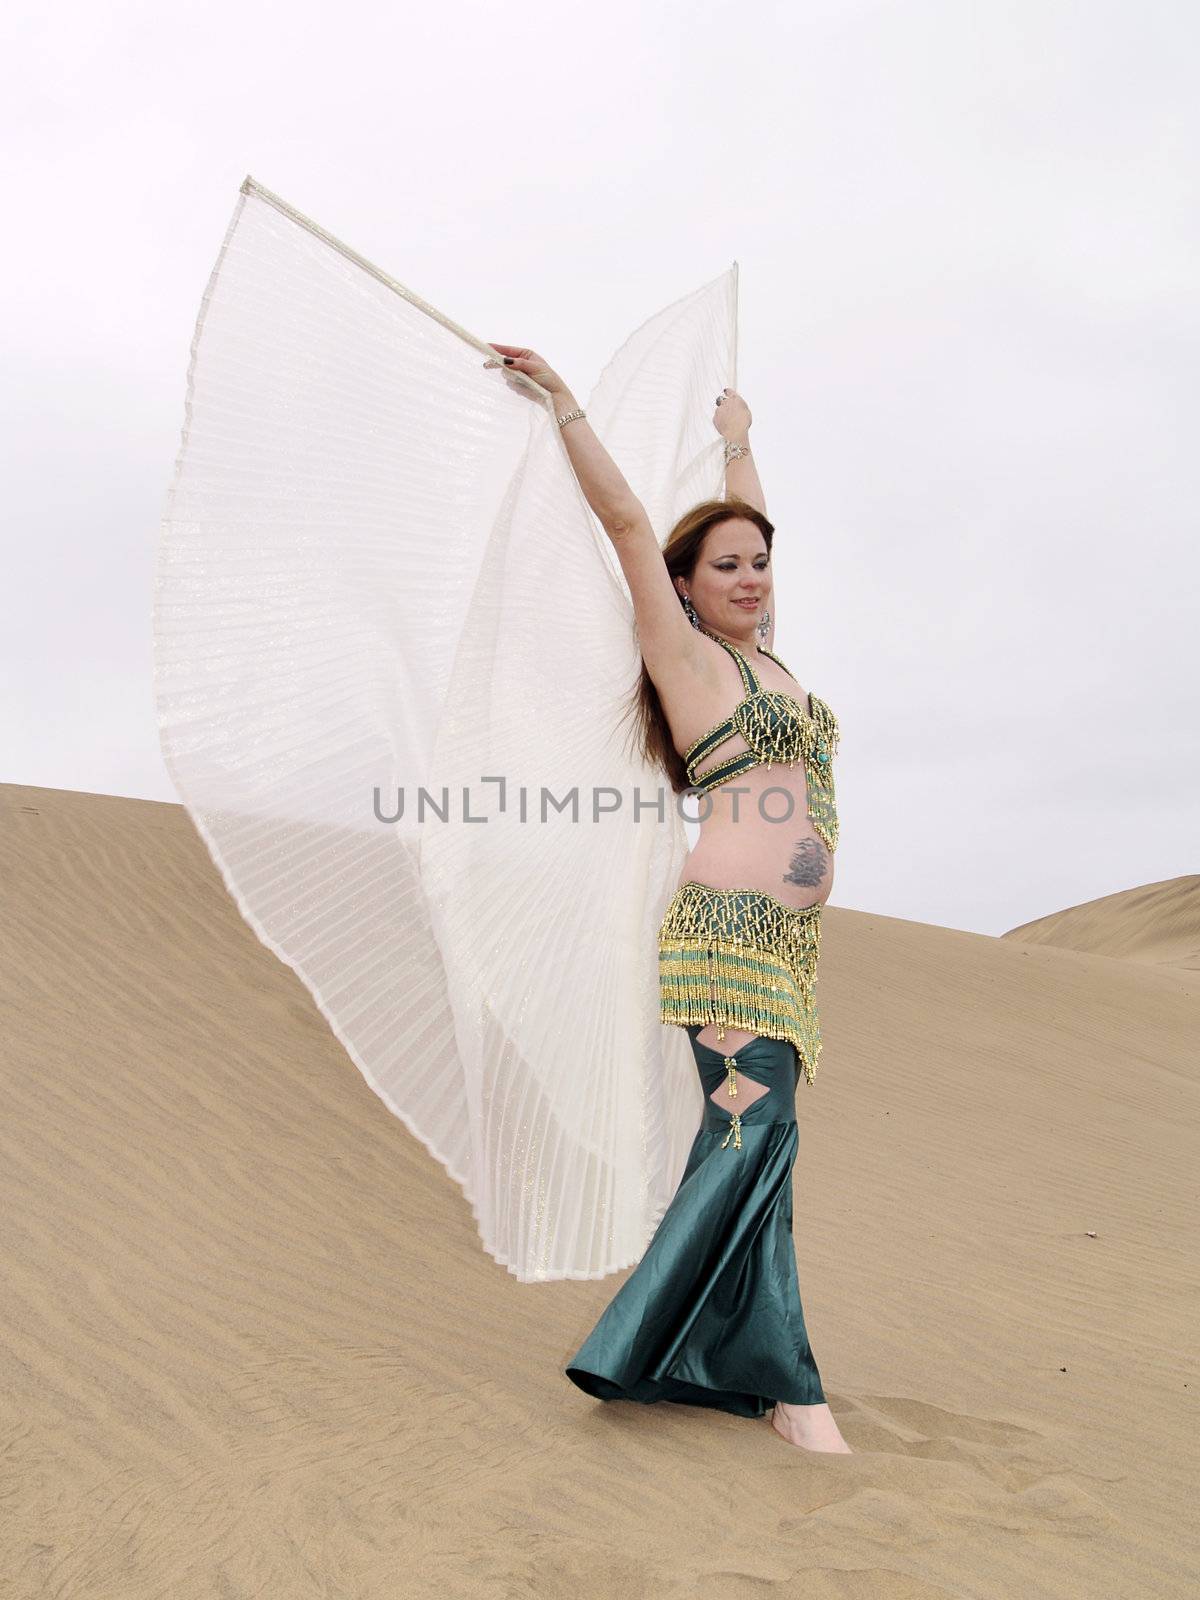 Arab dancer at desert with wings by fxegs